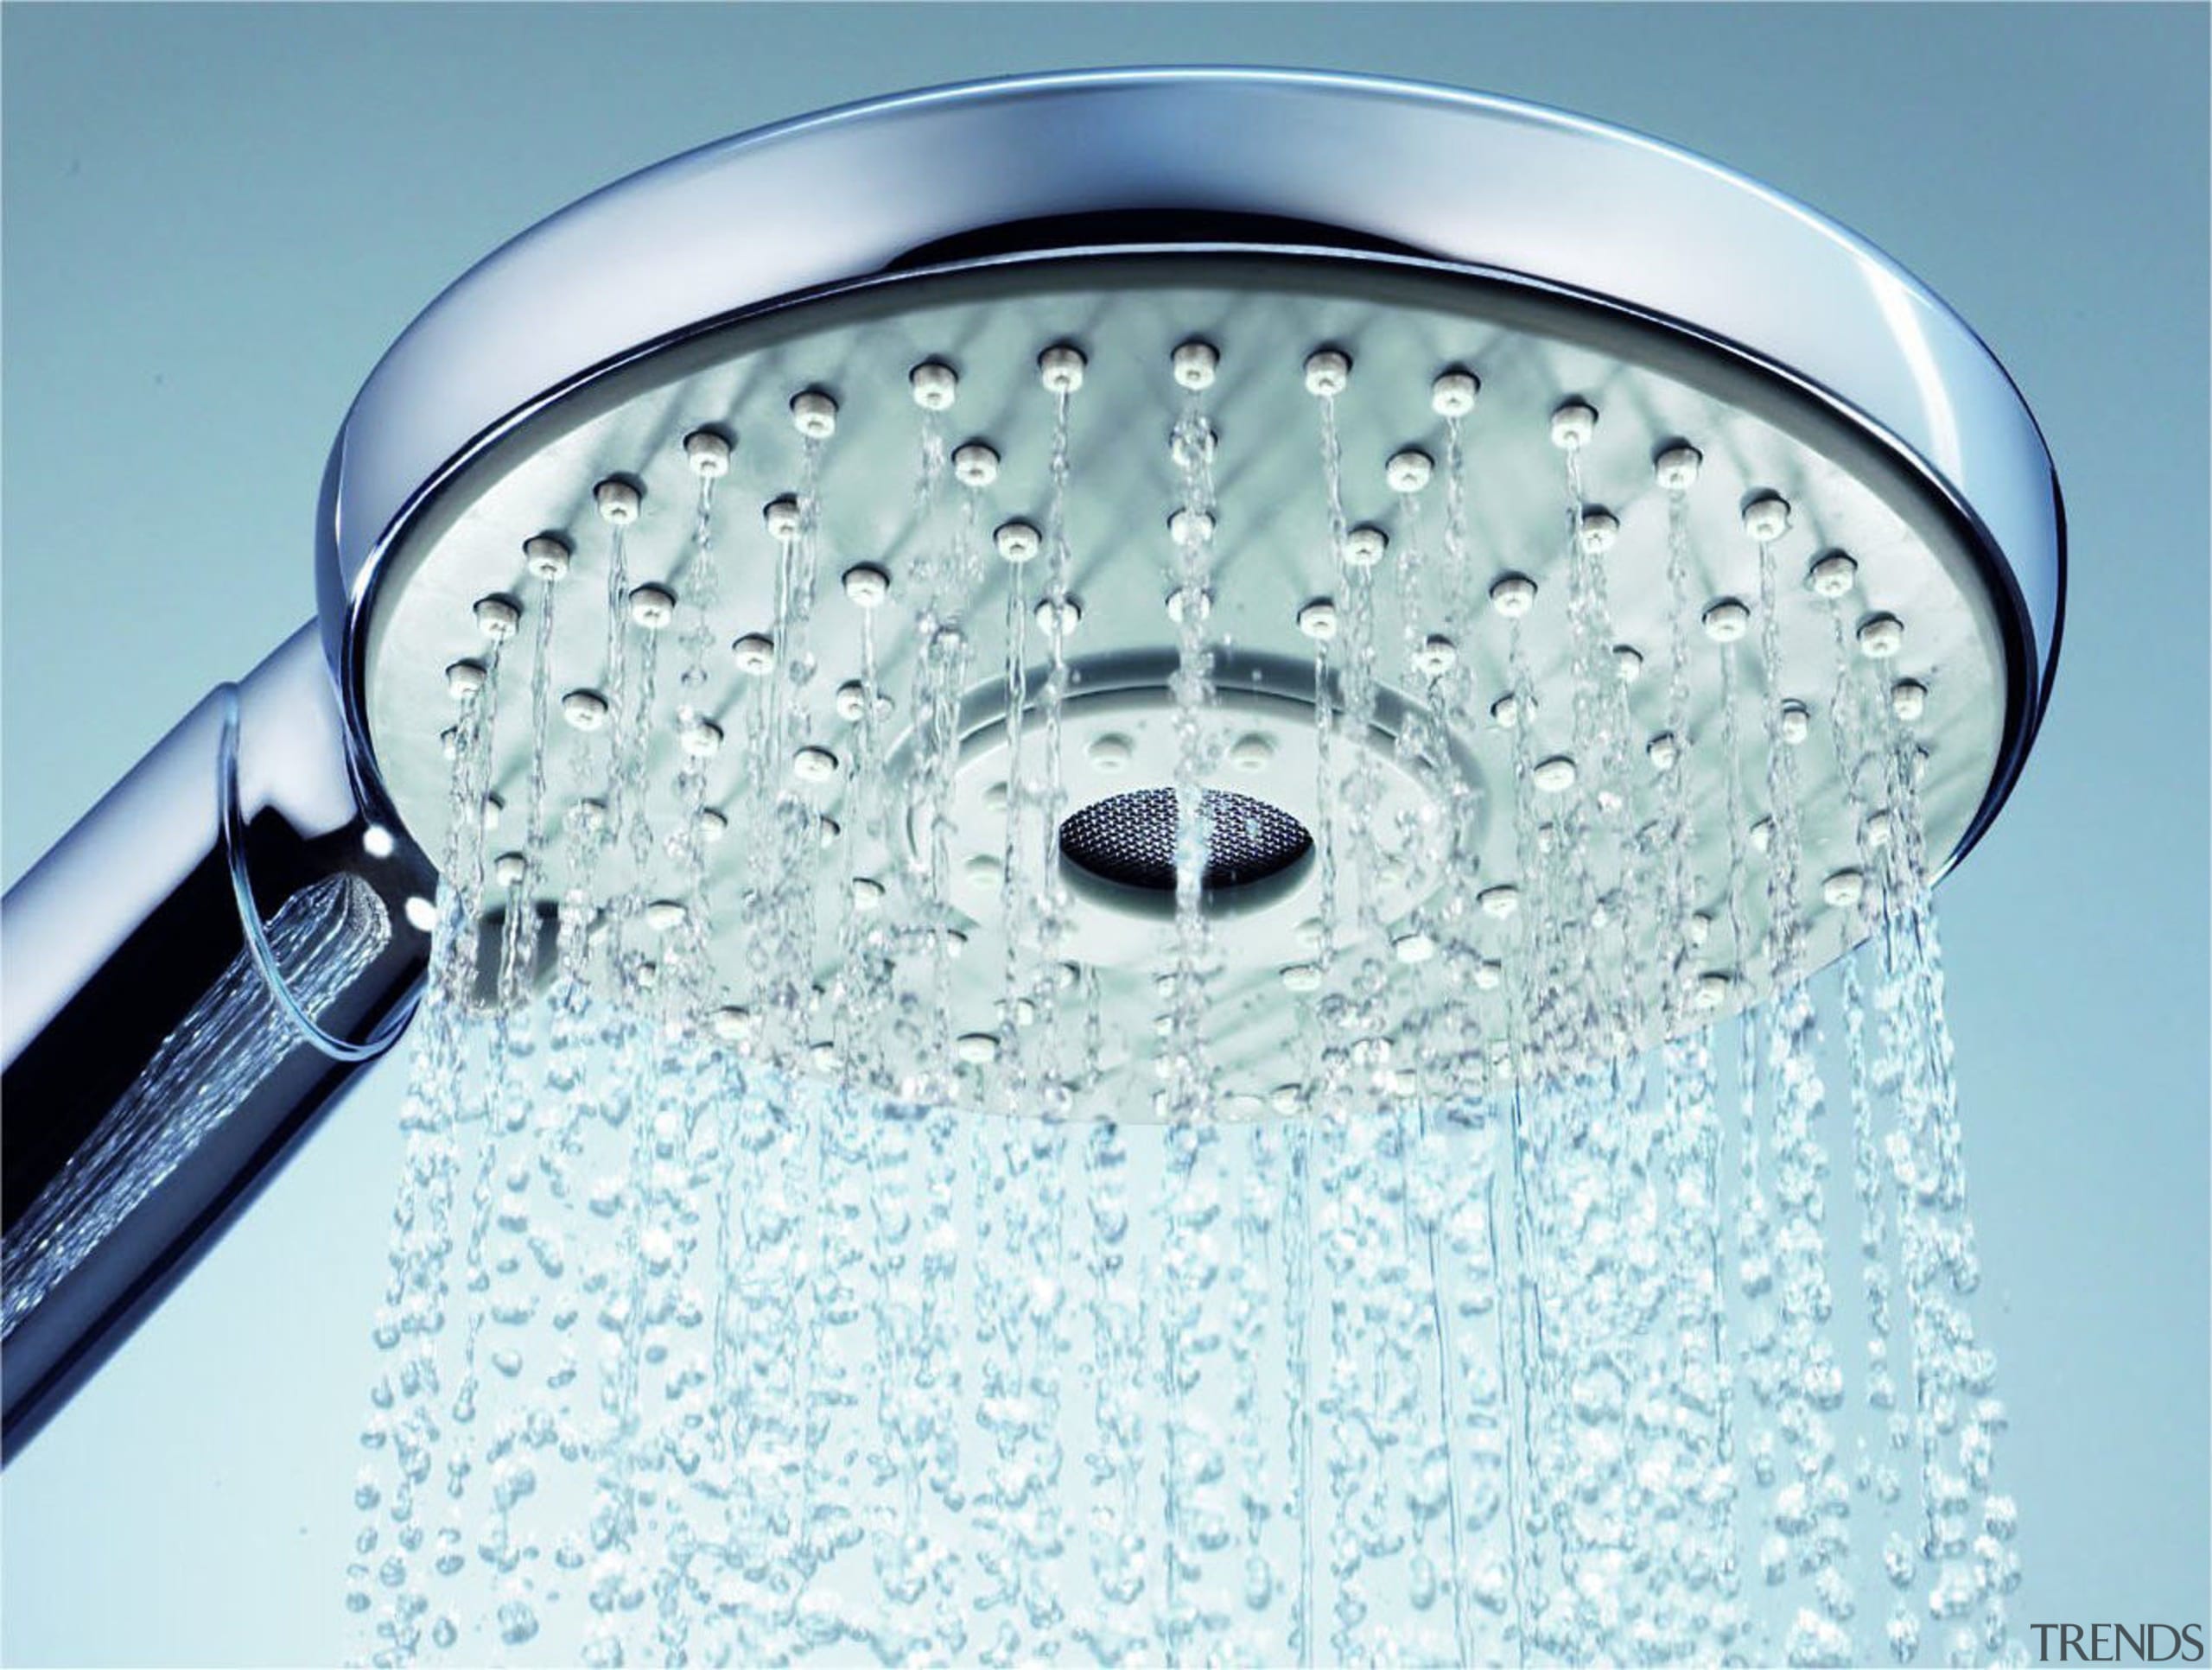 showerhead - product | product design | water product, product design, water, white, teal